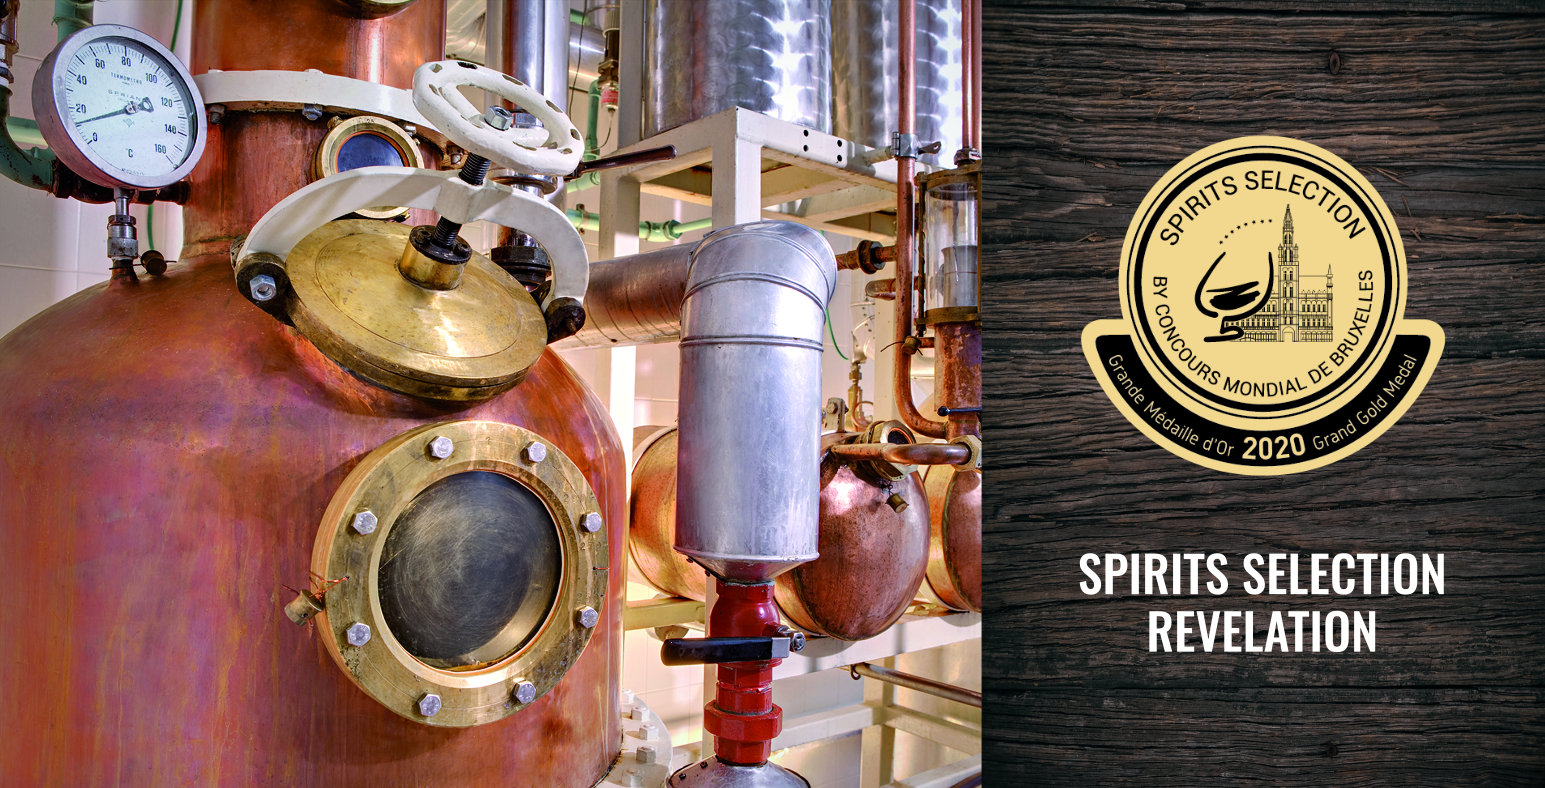 Roner SpA Distillerie, excellence in grappa – An interview by Carlo Dugo